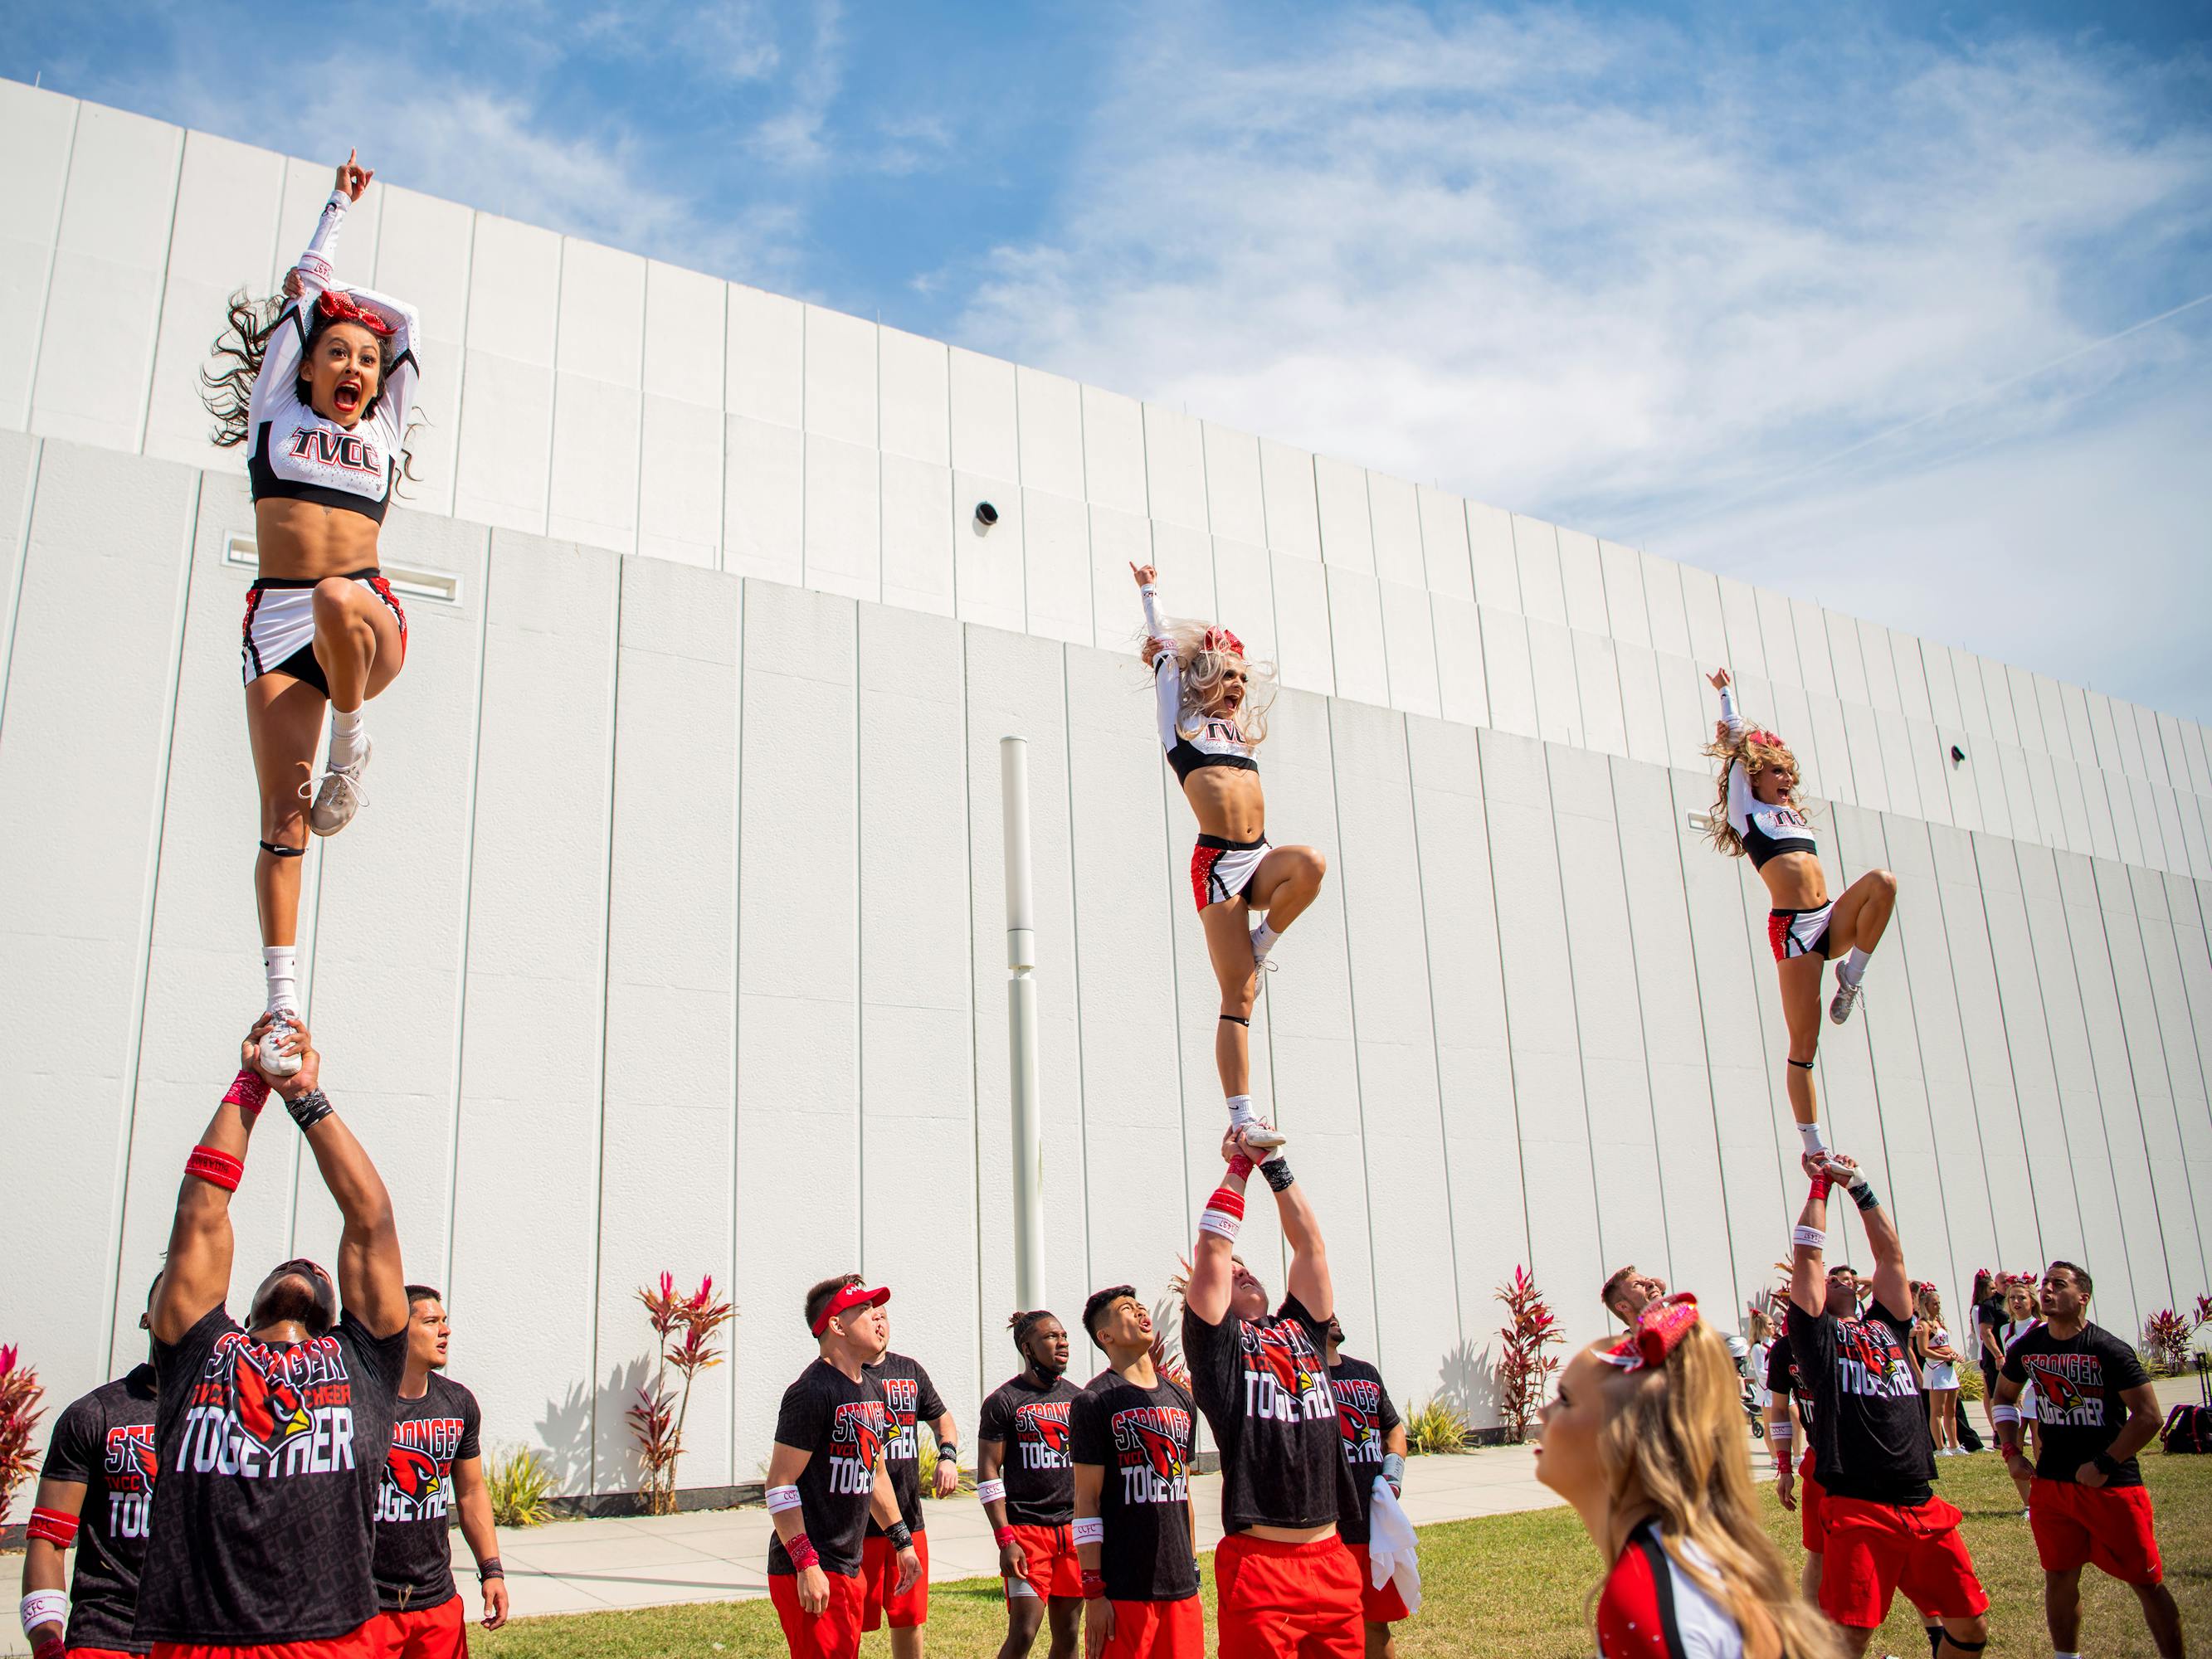 Trinity Valley Community College Cheer team performs an impressive stunt. Men in red shorts and black shirts stand around, and three hold women above their heads on one single foot. This looks so hard to balance!